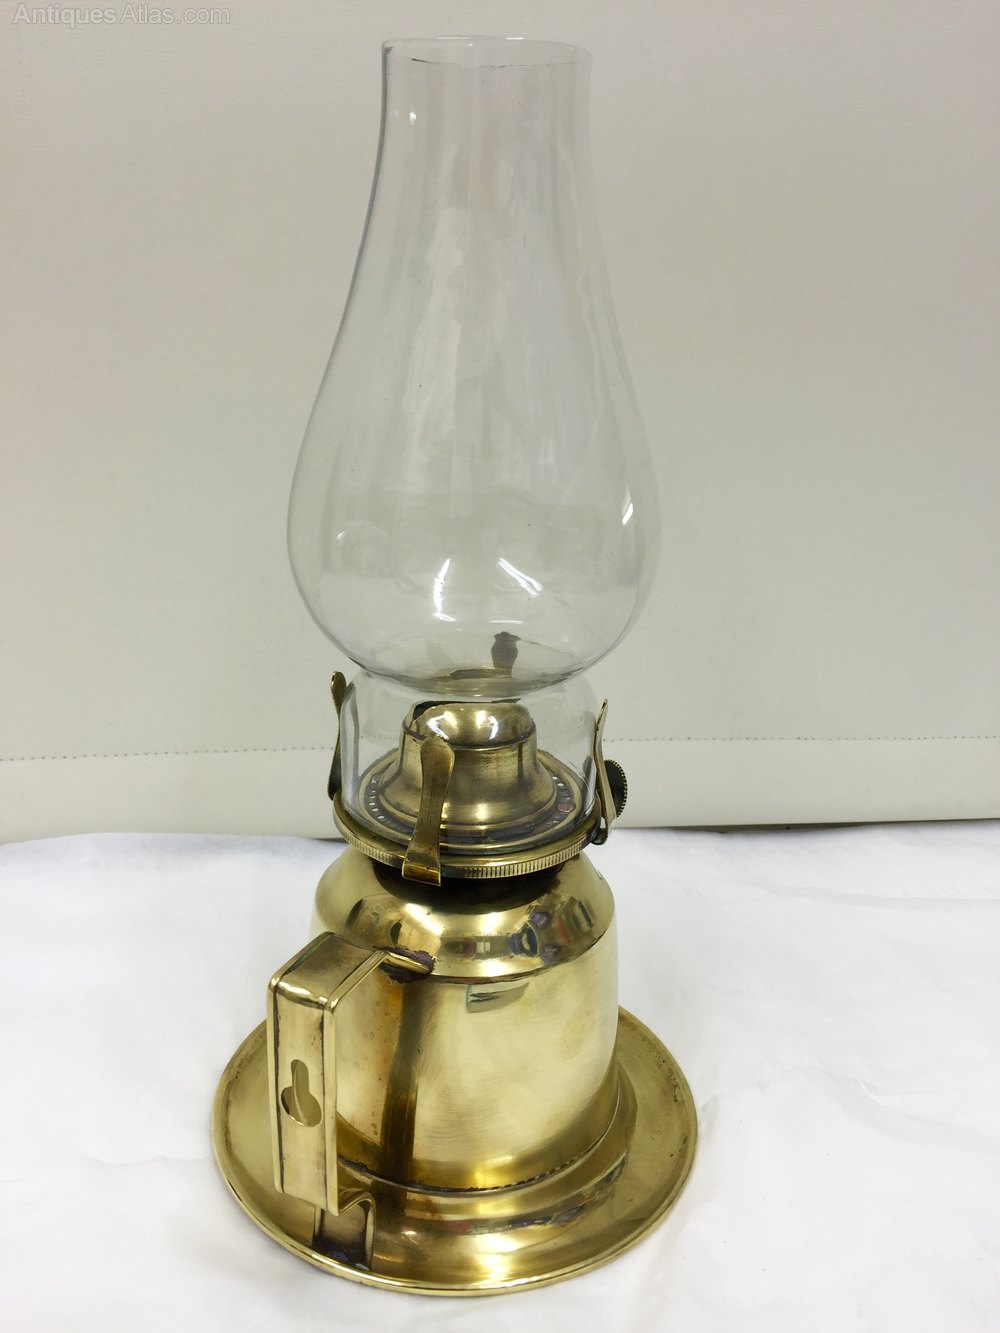 There are a few sorts of fuel that are utilized with antique brass oil lamp...